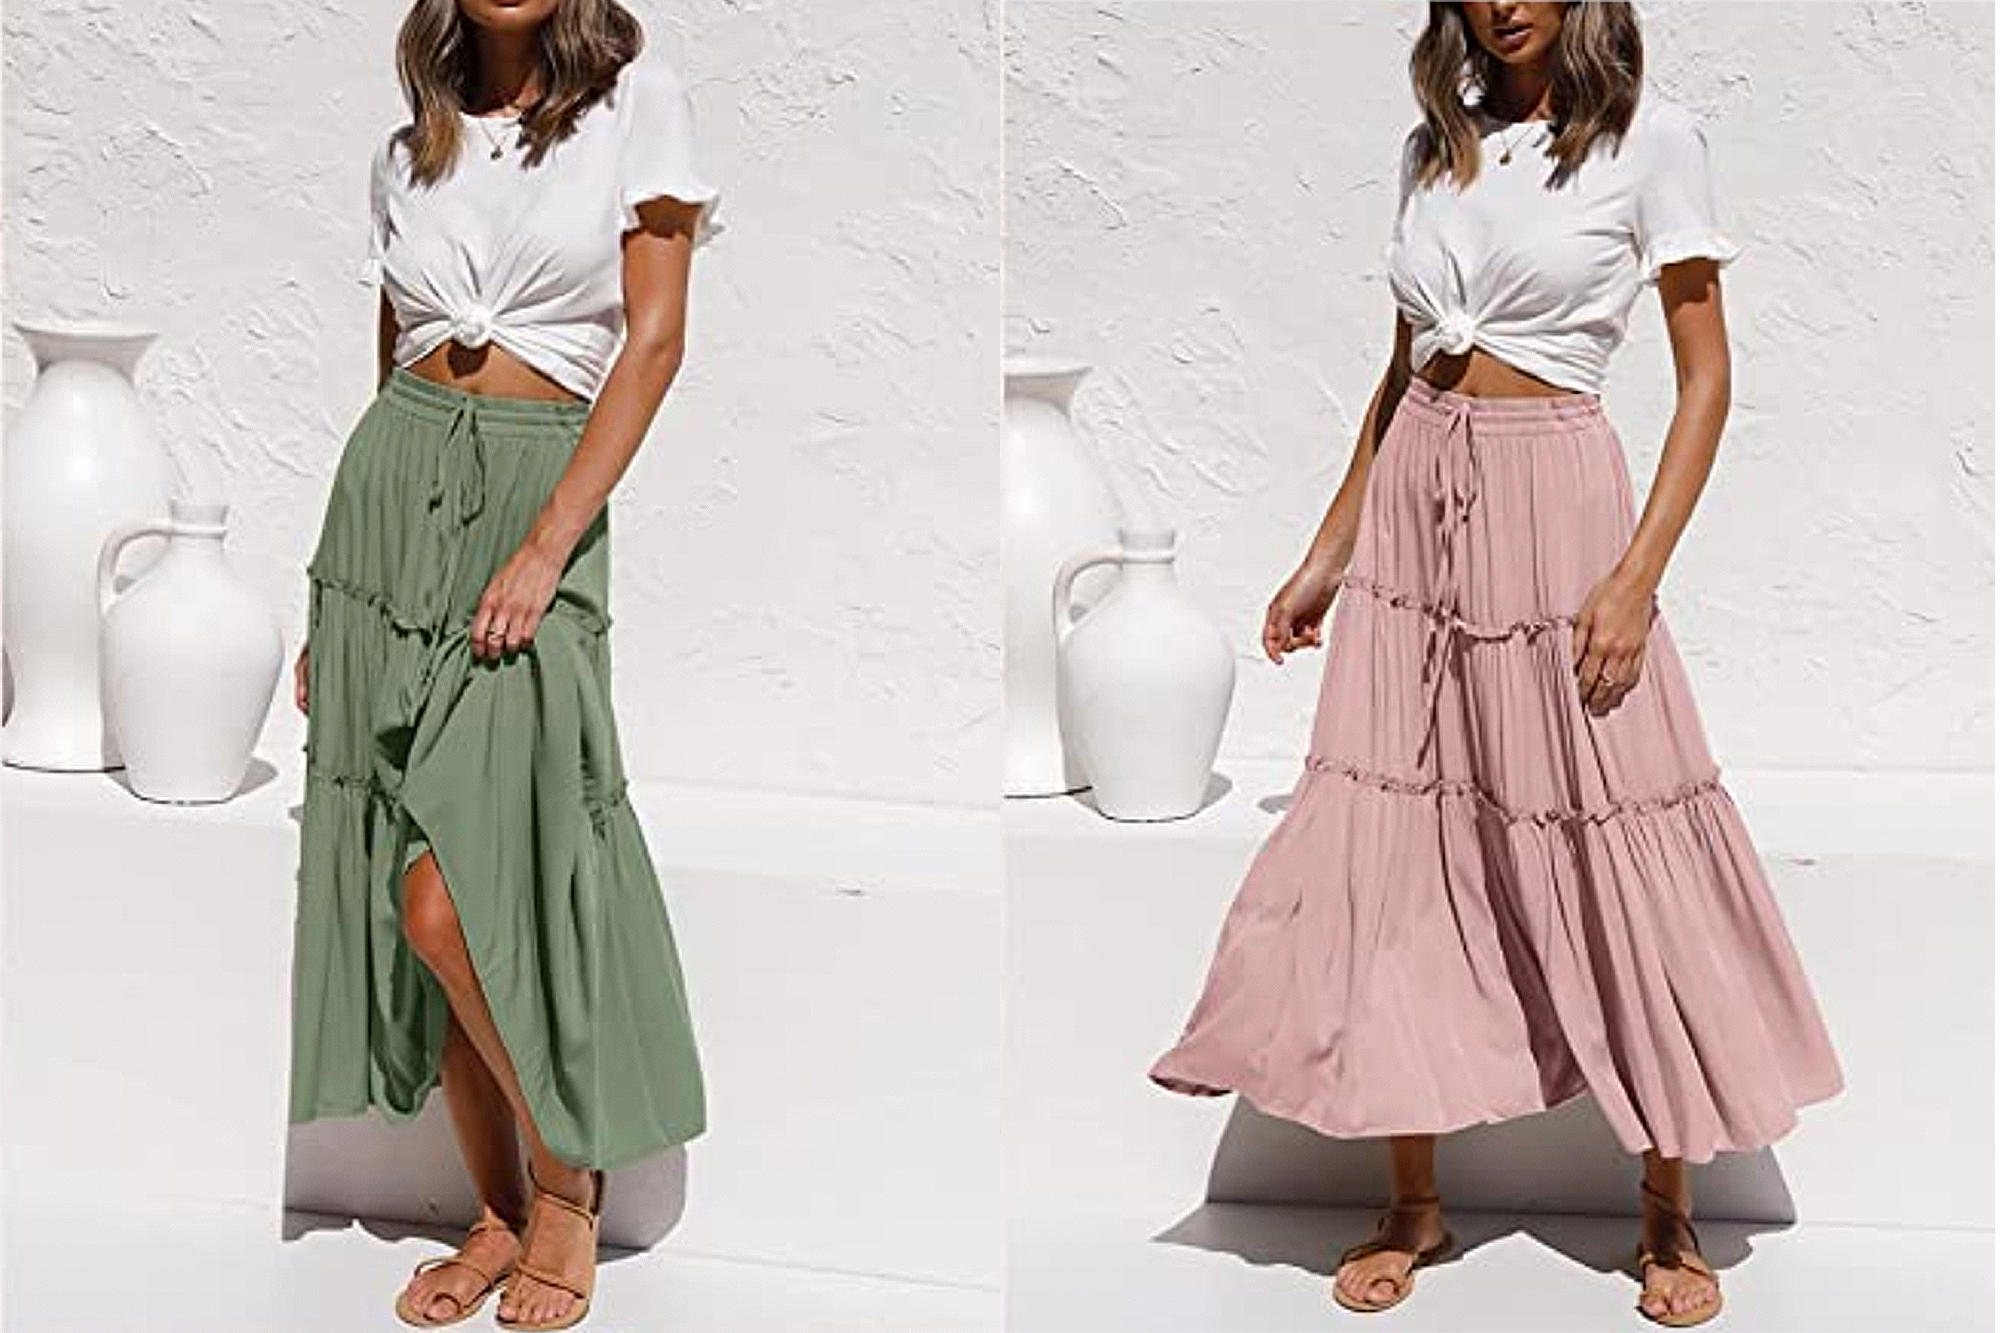 Maxi Skirts Are Trending for Spring